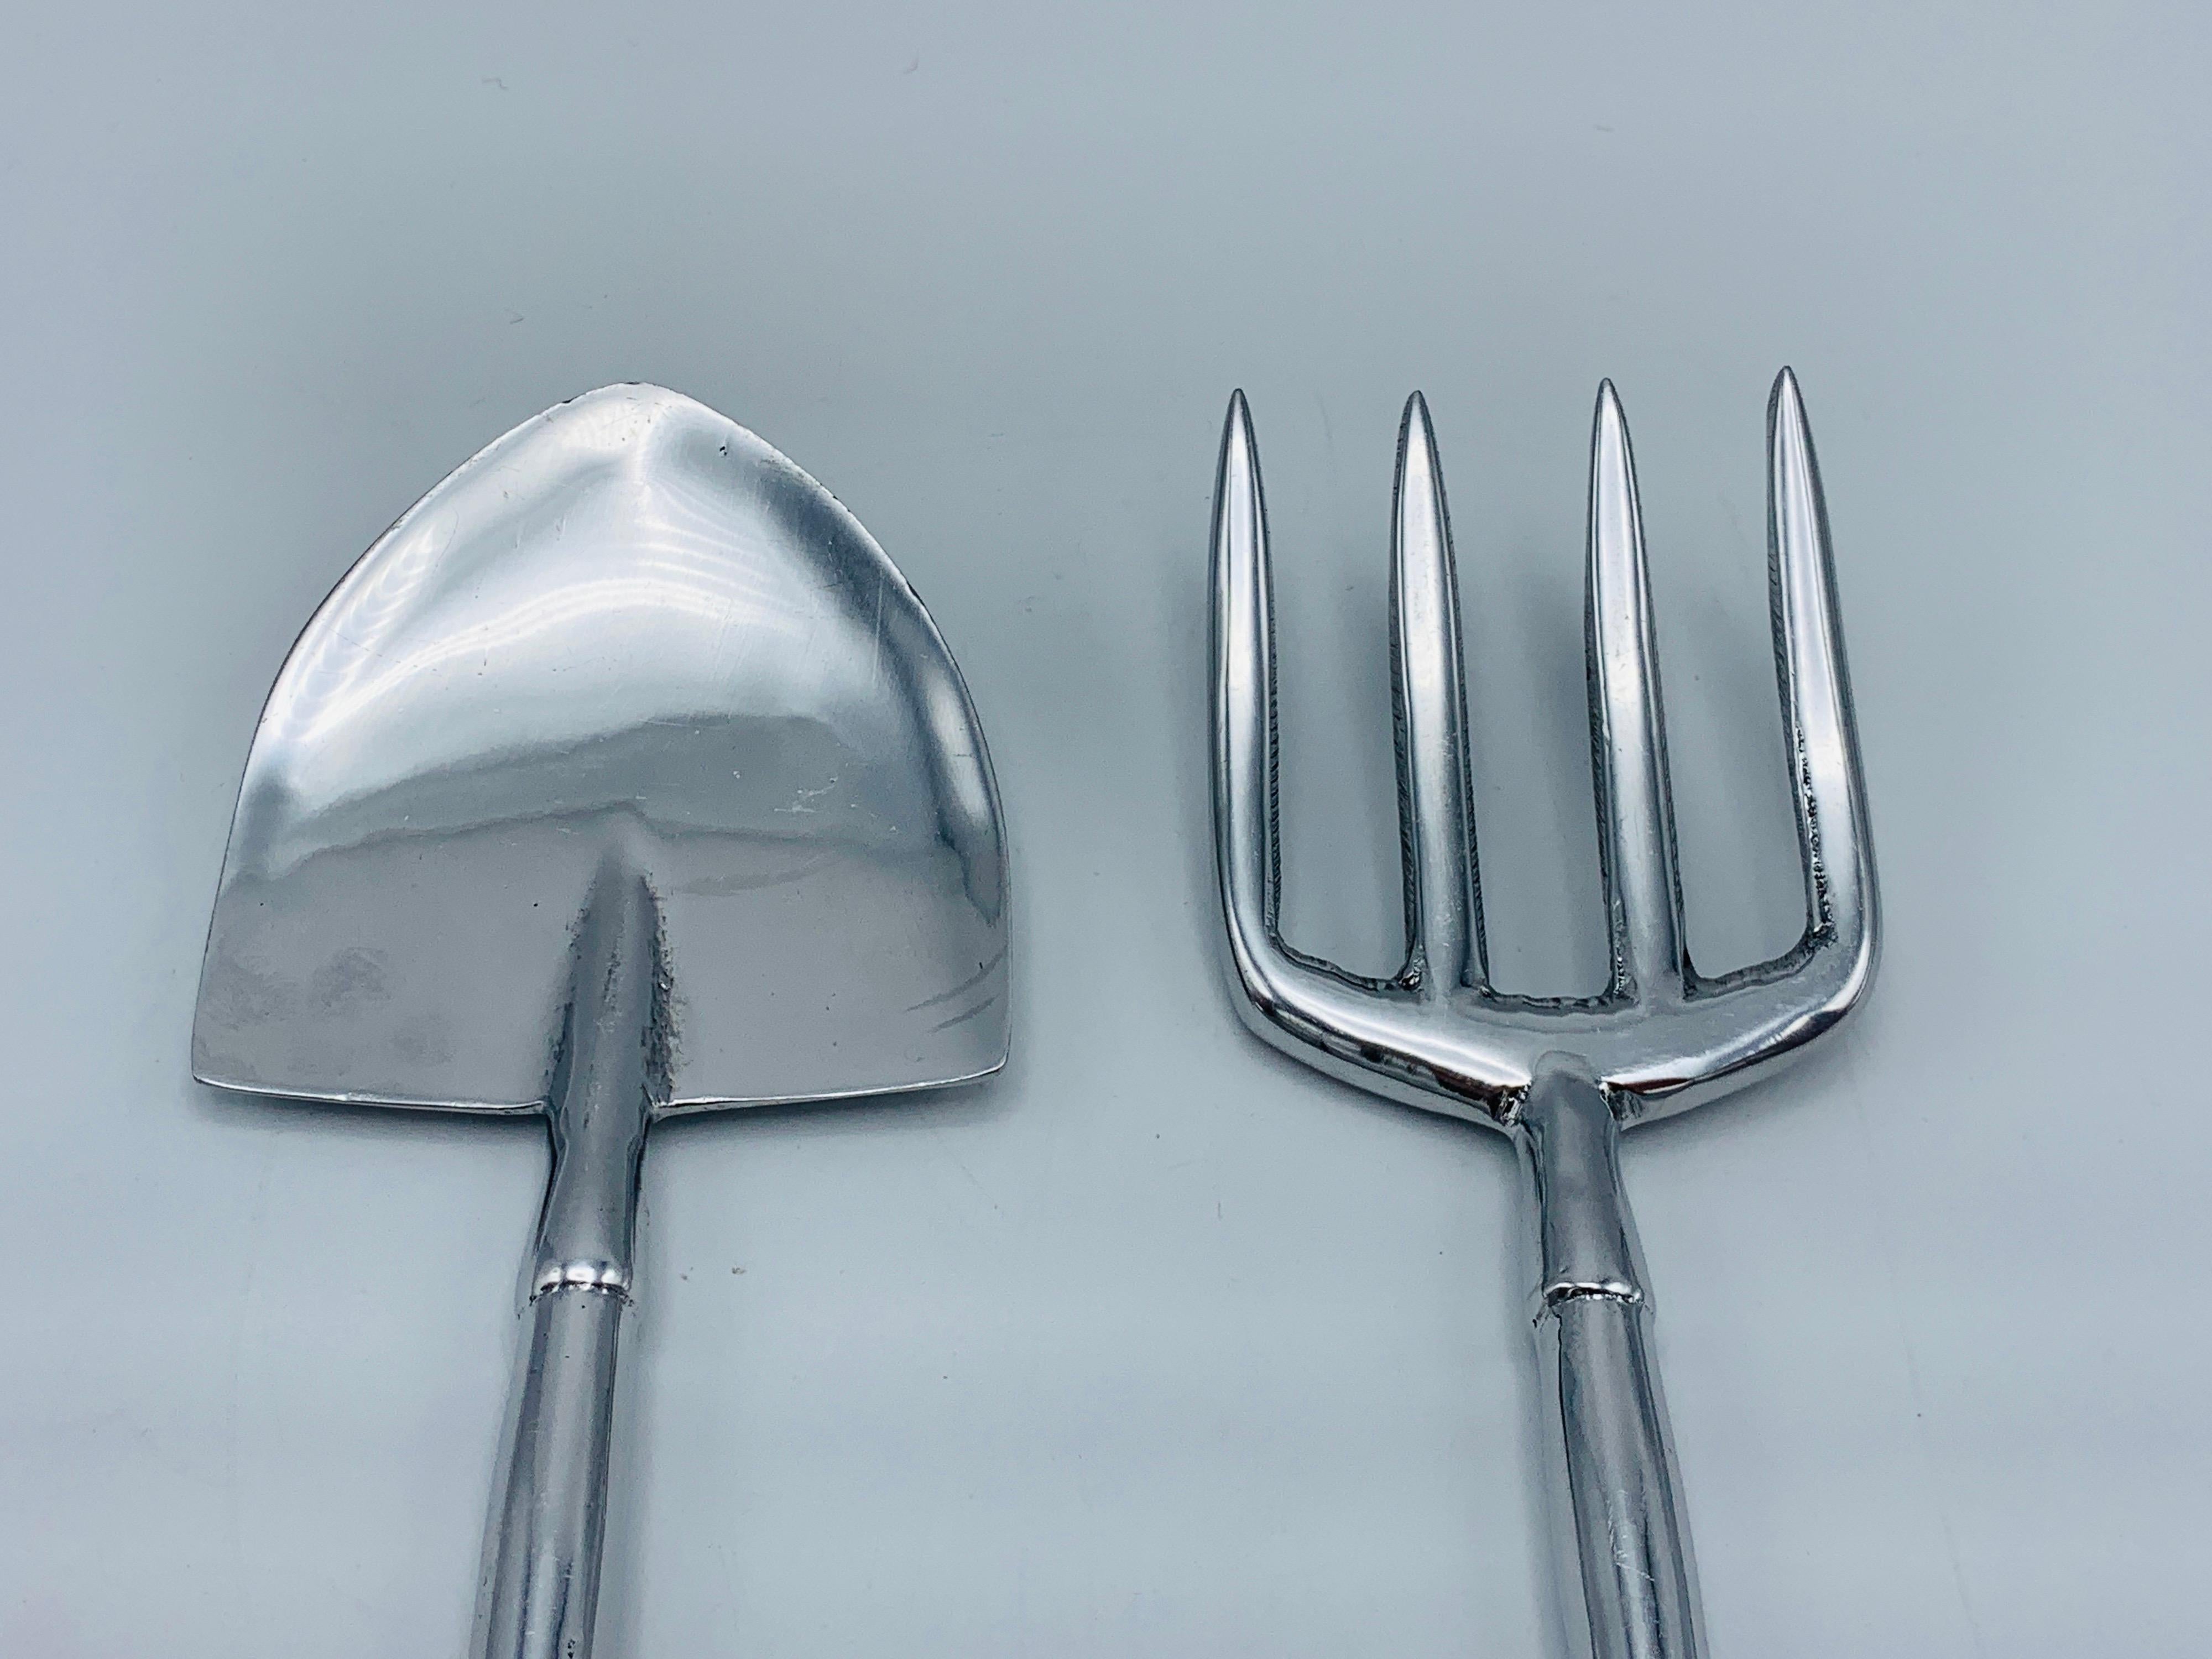 Offered is a pair of 1990s aluminum, garden tools shaped salad utensils. The shovel and pitchfork utensil set have been freshly polished and cleaned, giving a vibrant glow to the material. Marked '1995, Mariposa' on backside of each, see last two